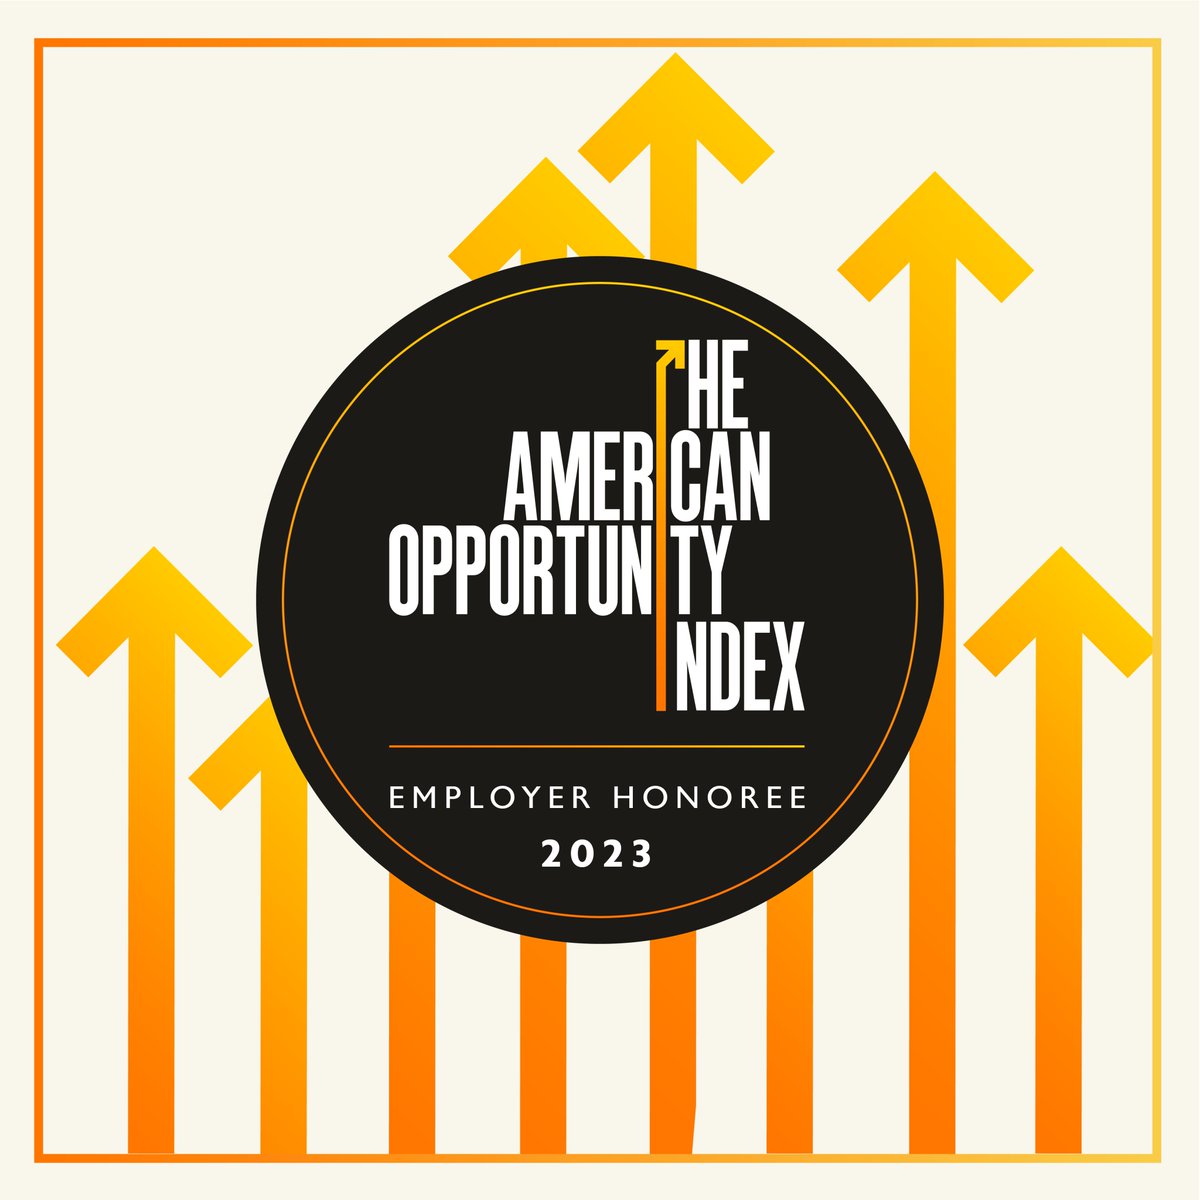 .@PayPal was named as a top company for career growth by the #AmericanOpportunityIndex! 🙌 We believe our employees are one of our most valuable assets, and we are honored to be recognized for our commitment to their career growth. americanopportunityindex.org